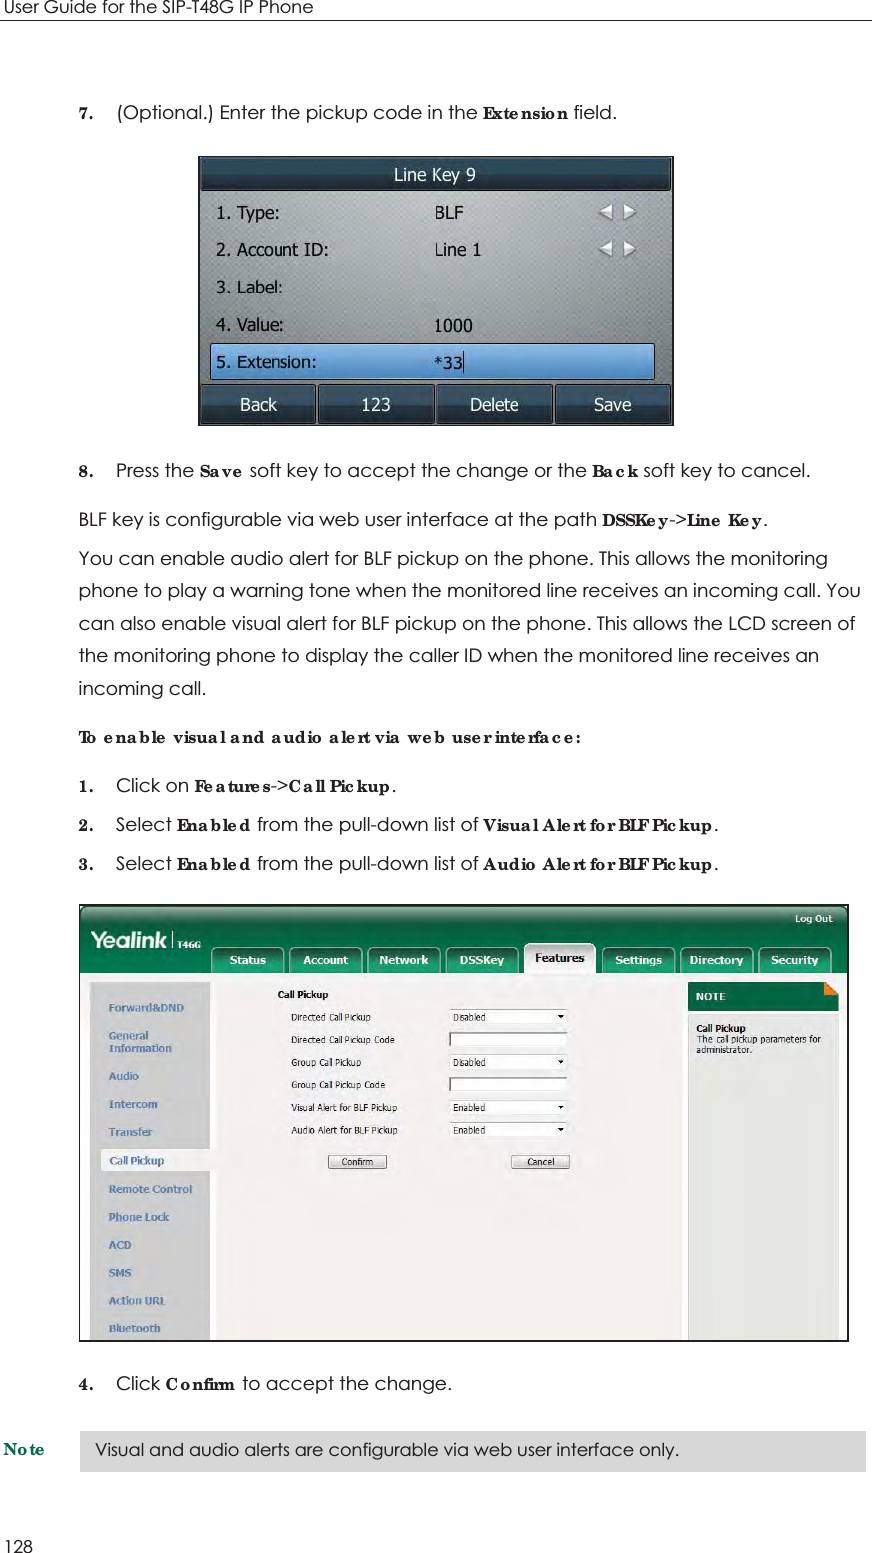 User Guide for the SIP-T48G IP Phone 128  7. (Optional.) Enter the pickup code in the Extension field.  8. Press the Save soft key to accept the change or the Back soft key to cancel. BLF key is configurable via web user interface at the path DSSKey-&gt;Line Key. You can enable audio alert for BLF pickup on the phone. This allows the monitoring phone to play a warning tone when the monitored line receives an incoming call. You can also enable visual alert for BLF pickup on the phone. This allows the LCD screen of the monitoring phone to display the caller ID when the monitored line receives an incoming call. To enable visual and audio alert via web user interface: 1. Click on Features-&gt;Call Pickup. 2. Select Enabled from the pull-down list of Visual Alert for BLF Pickup. 3. Select Enabled from the pull-down list of Audio Alert for BLF Pickup.  4. Click Confirm to accept the change. Note Visual and audio alerts are configurable via web user interface only. 